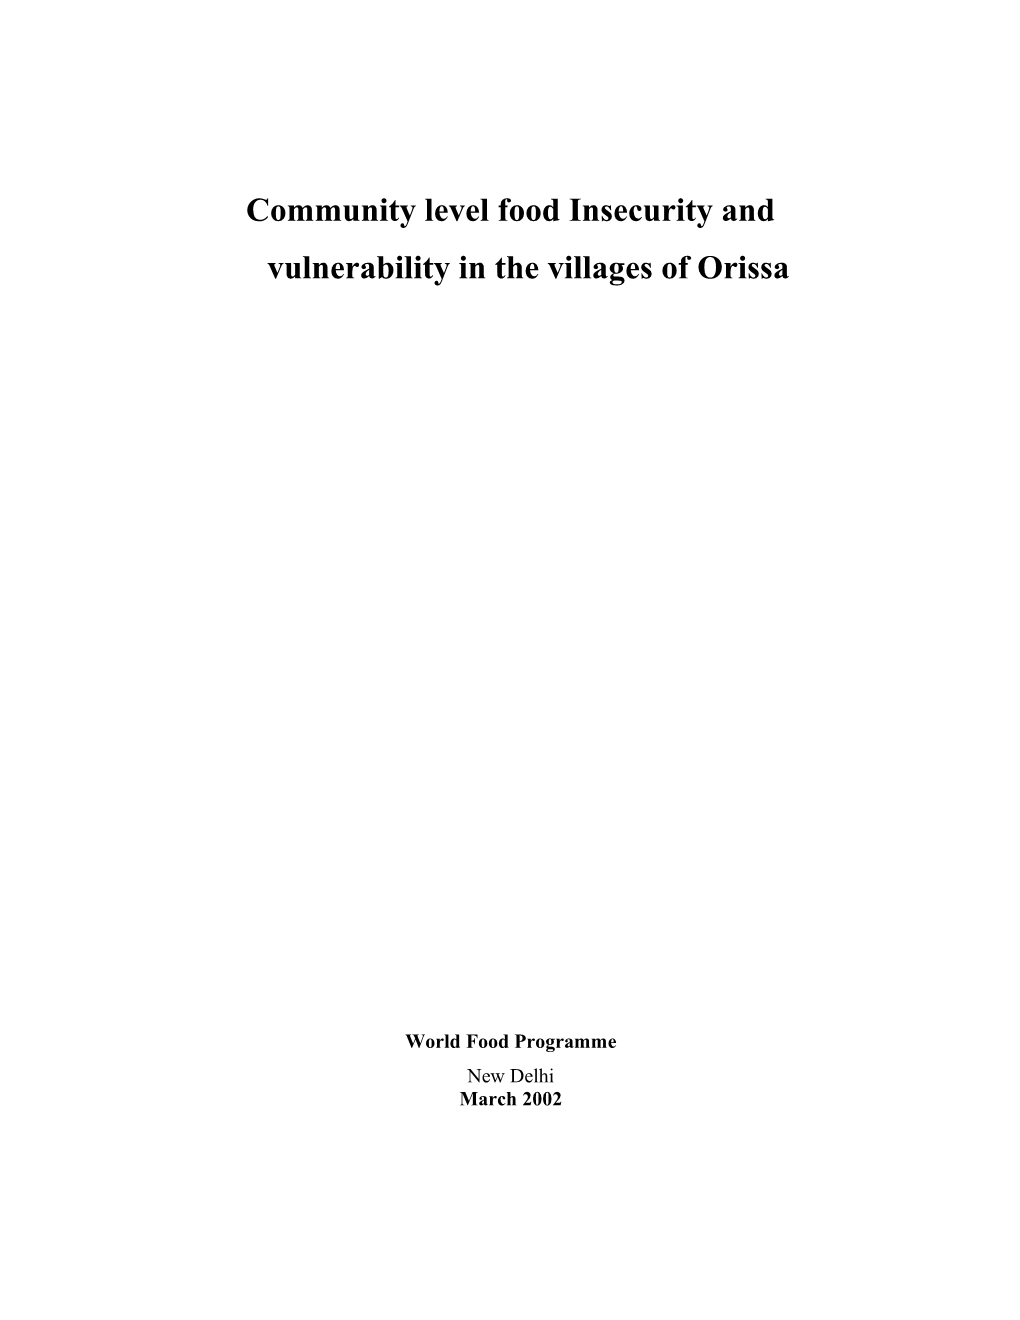 Community Level Food Insecurity and Vulnerability in the Villages of Orissa